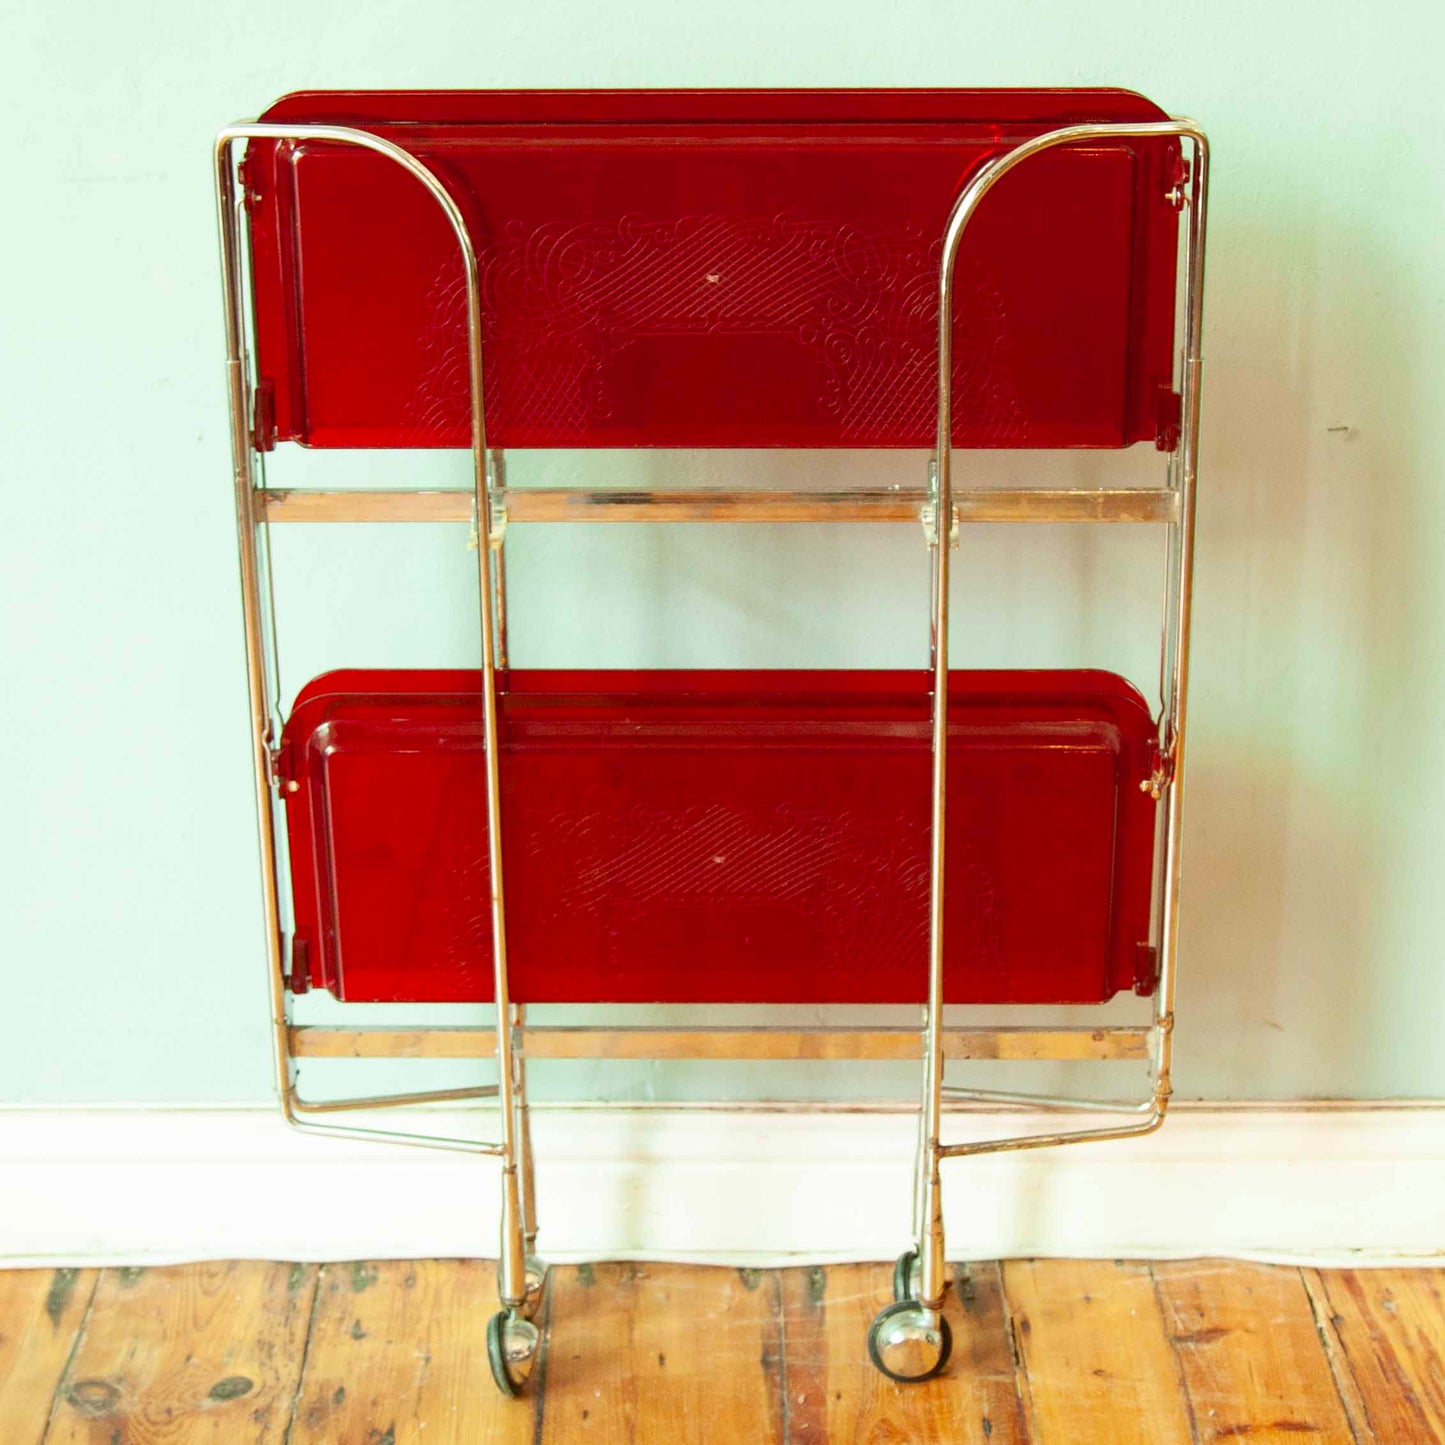 Retro drinks trolley (collapsible)